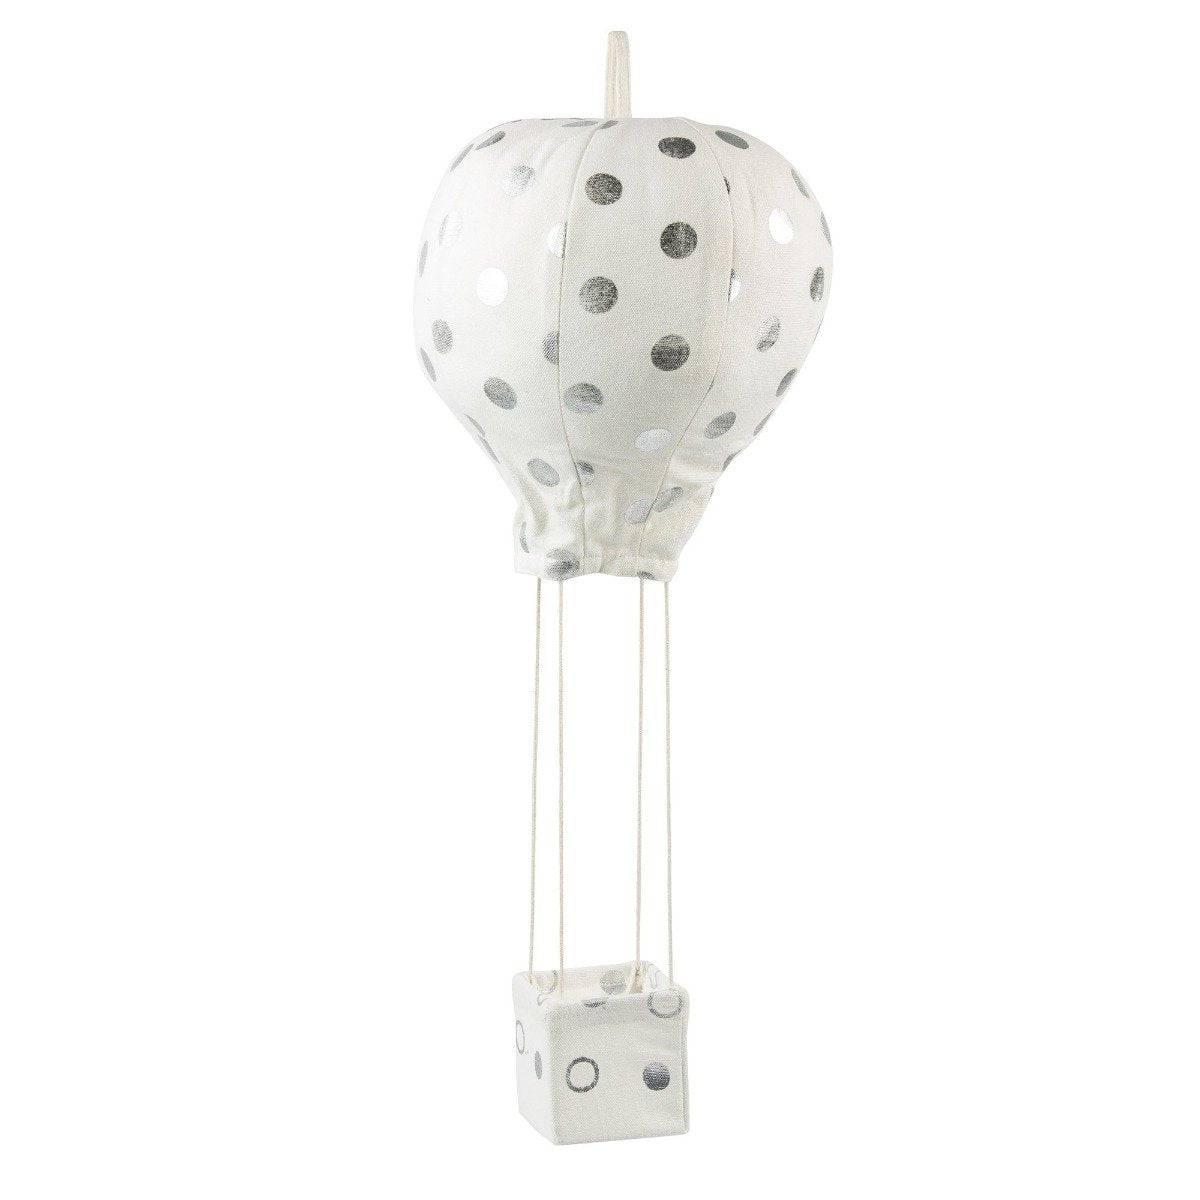 Lil' Polka Dot Hot Air Balloon Mobile in Silver - Twinkle Twinkle Little One